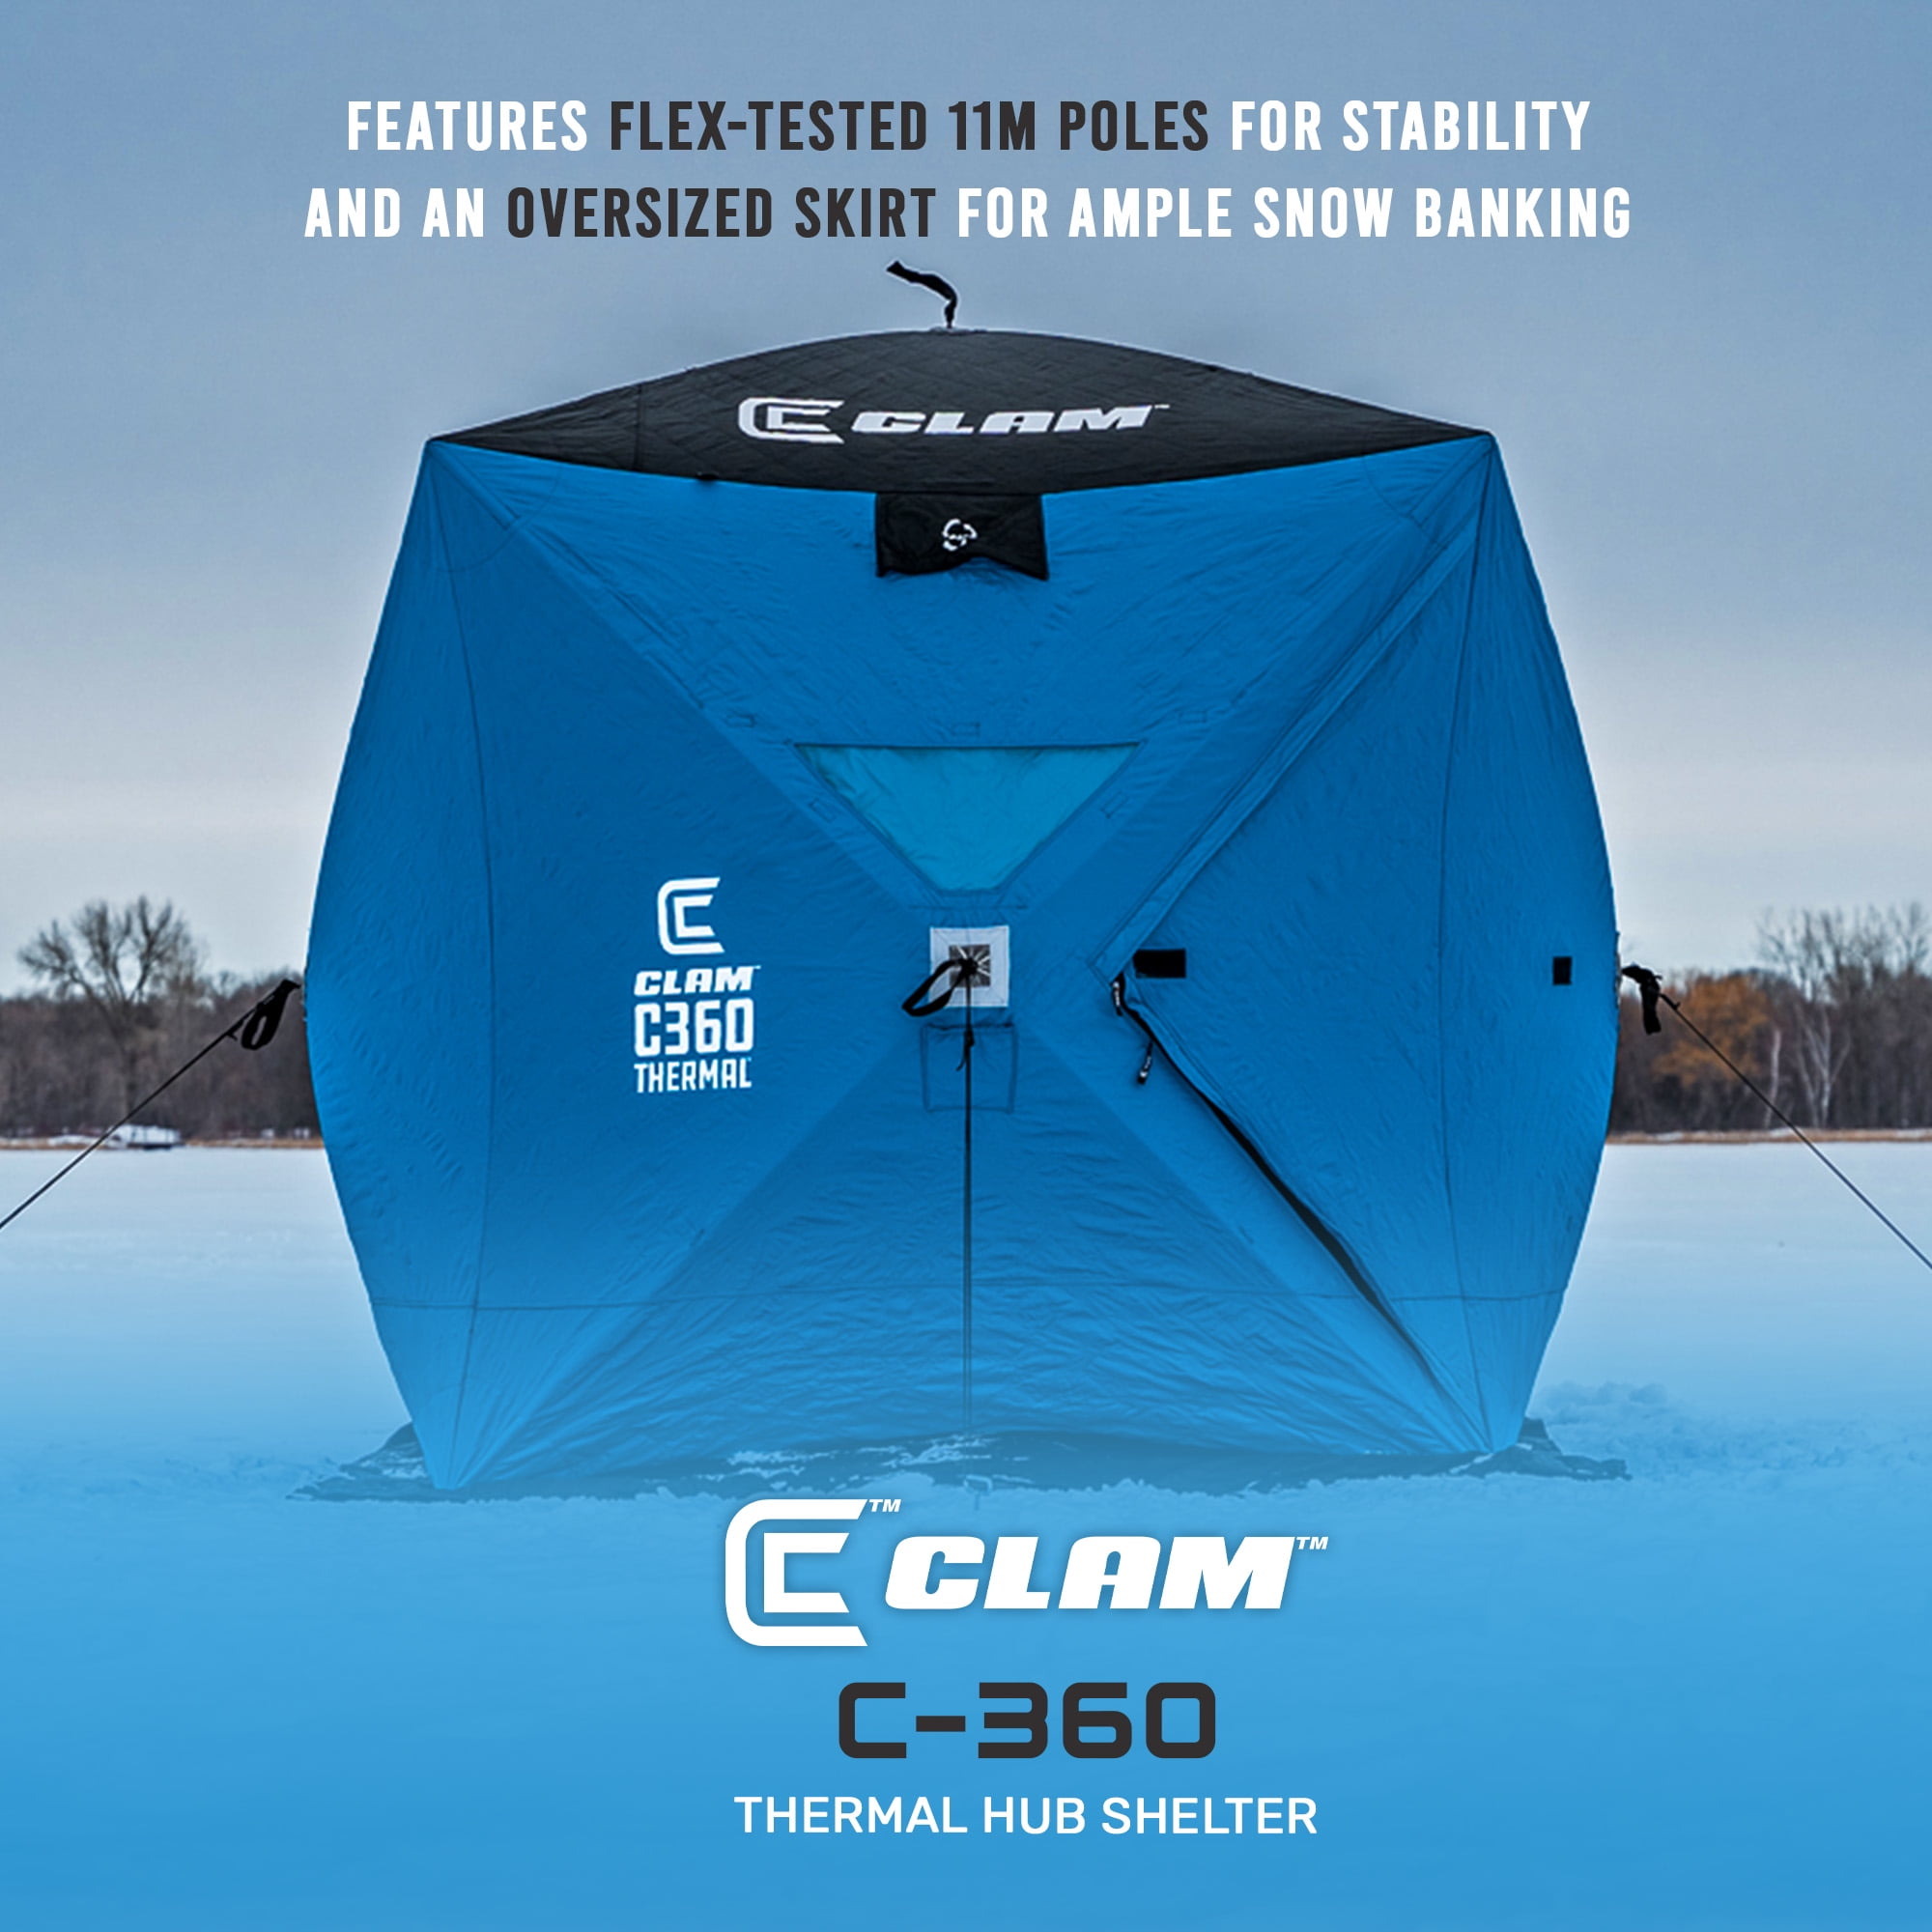 Clam C-720 2-6 Person Portable 6 X 12 Foot Pop-up Ice Fishing